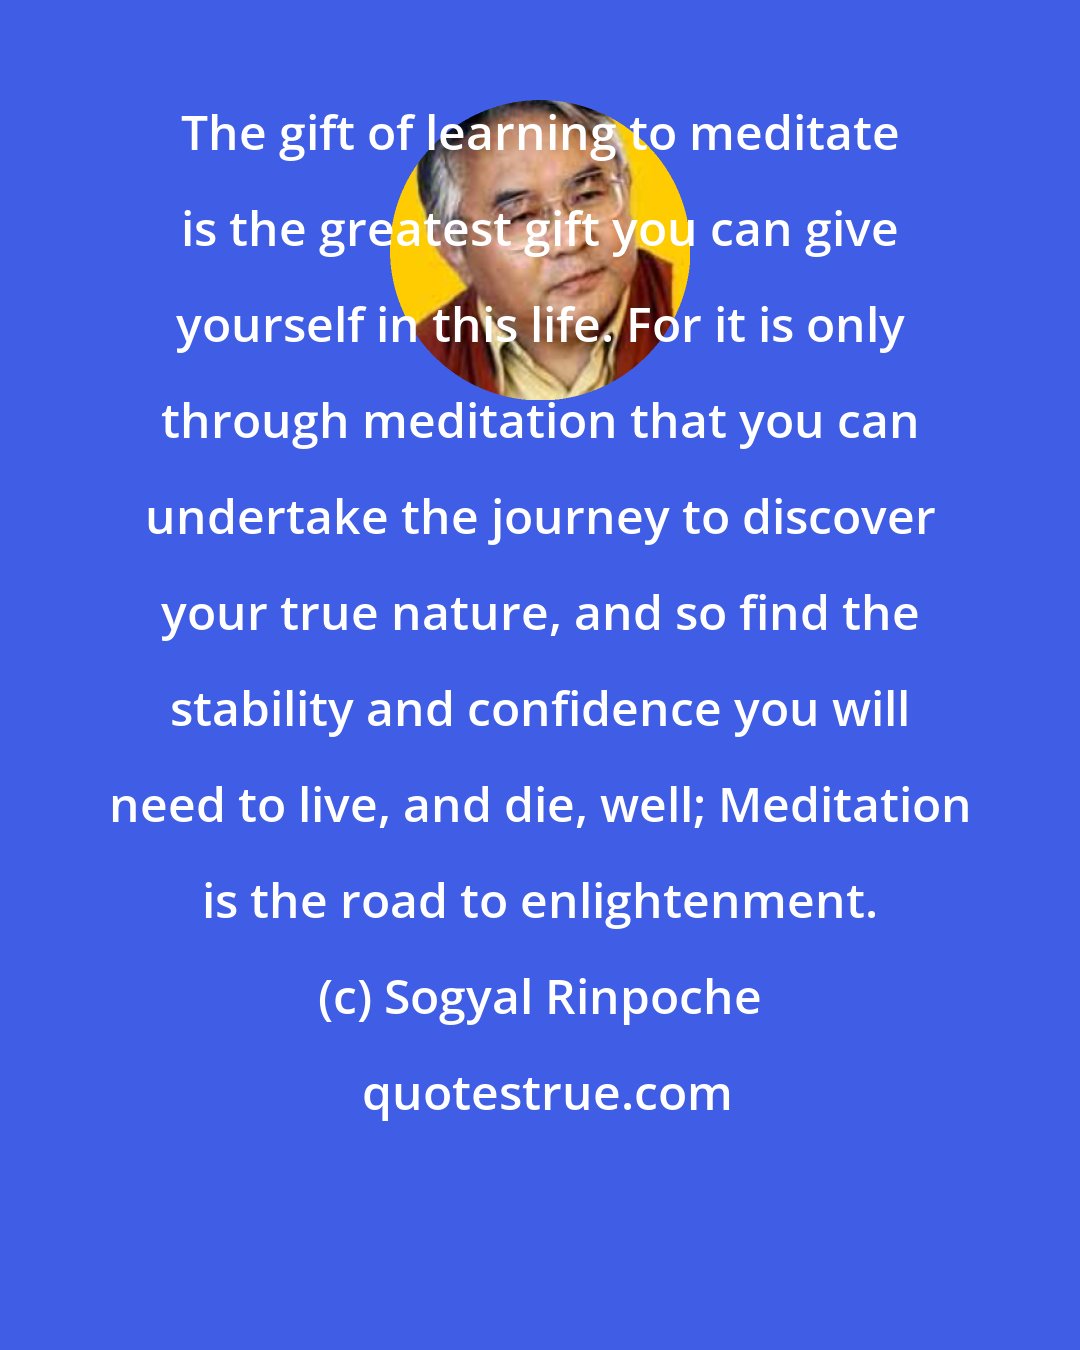 Sogyal Rinpoche: The gift of learning to meditate is the greatest gift you can give yourself in this life. For it is only through meditation that you can undertake the journey to discover your true nature, and so find the stability and confidence you will need to live, and die, well; Meditation is the road to enlightenment.